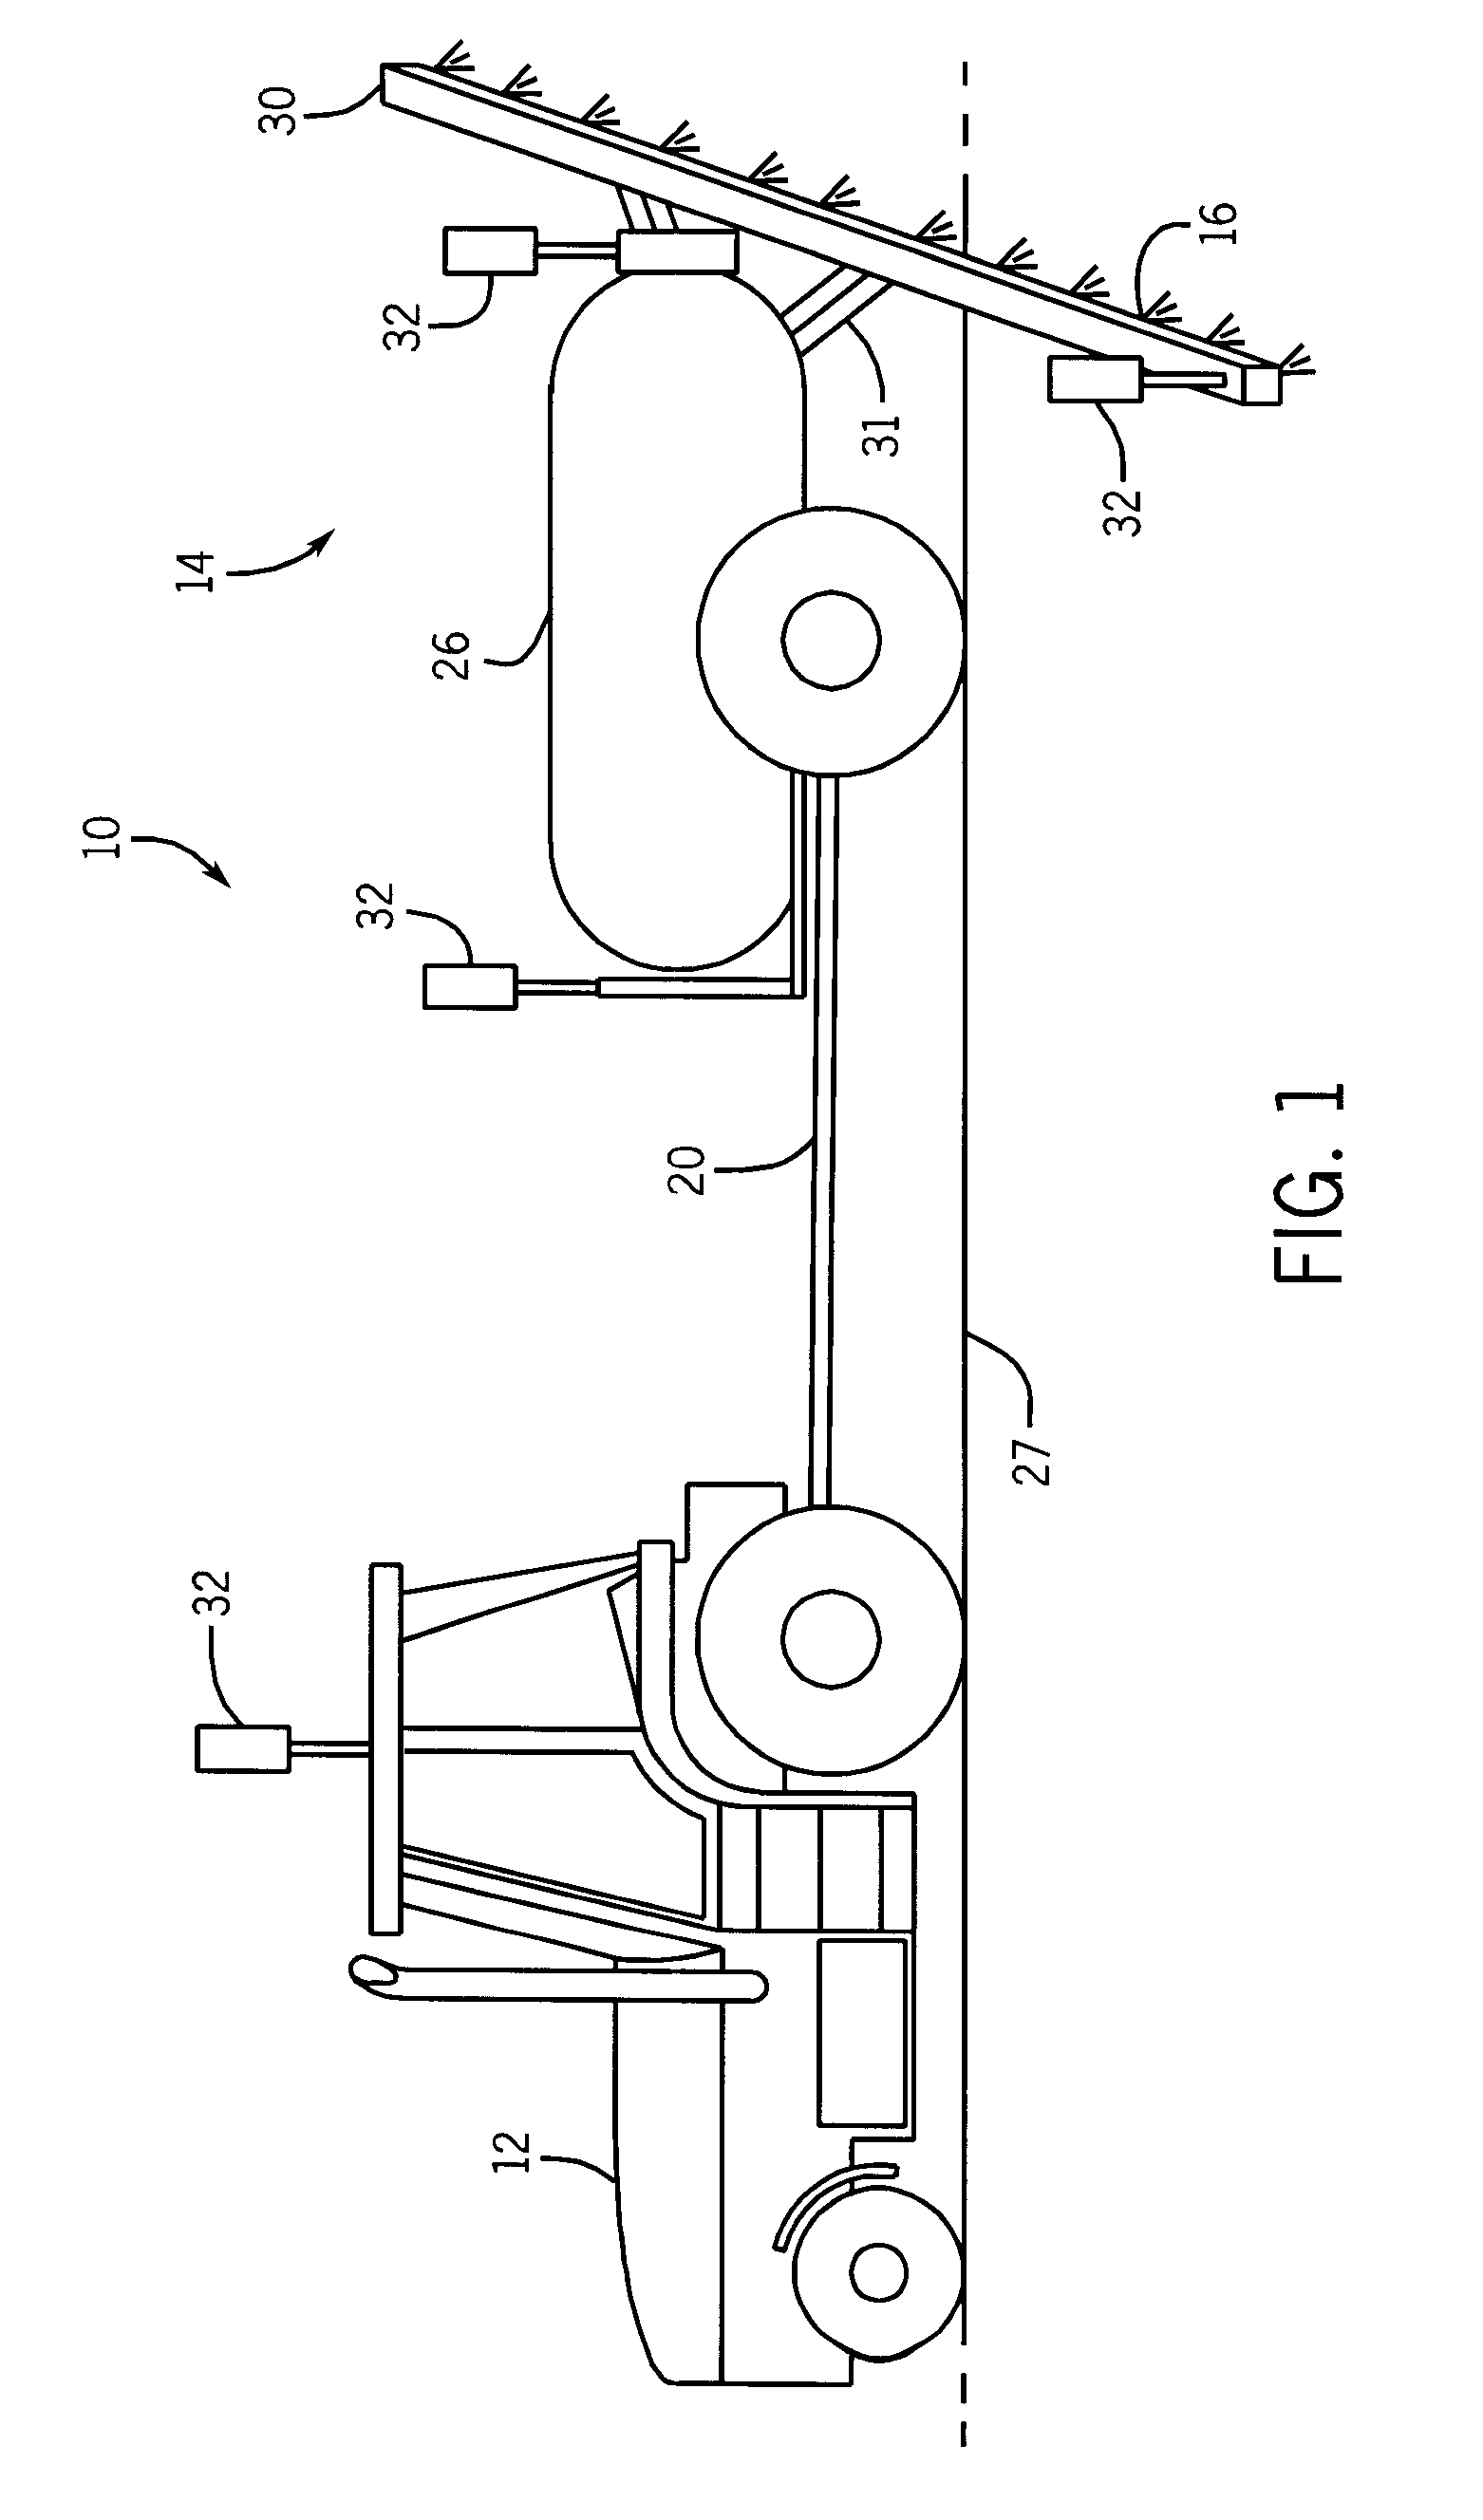 Method and apparatus for optimization of agricultural field operations using weather, product and environmental information